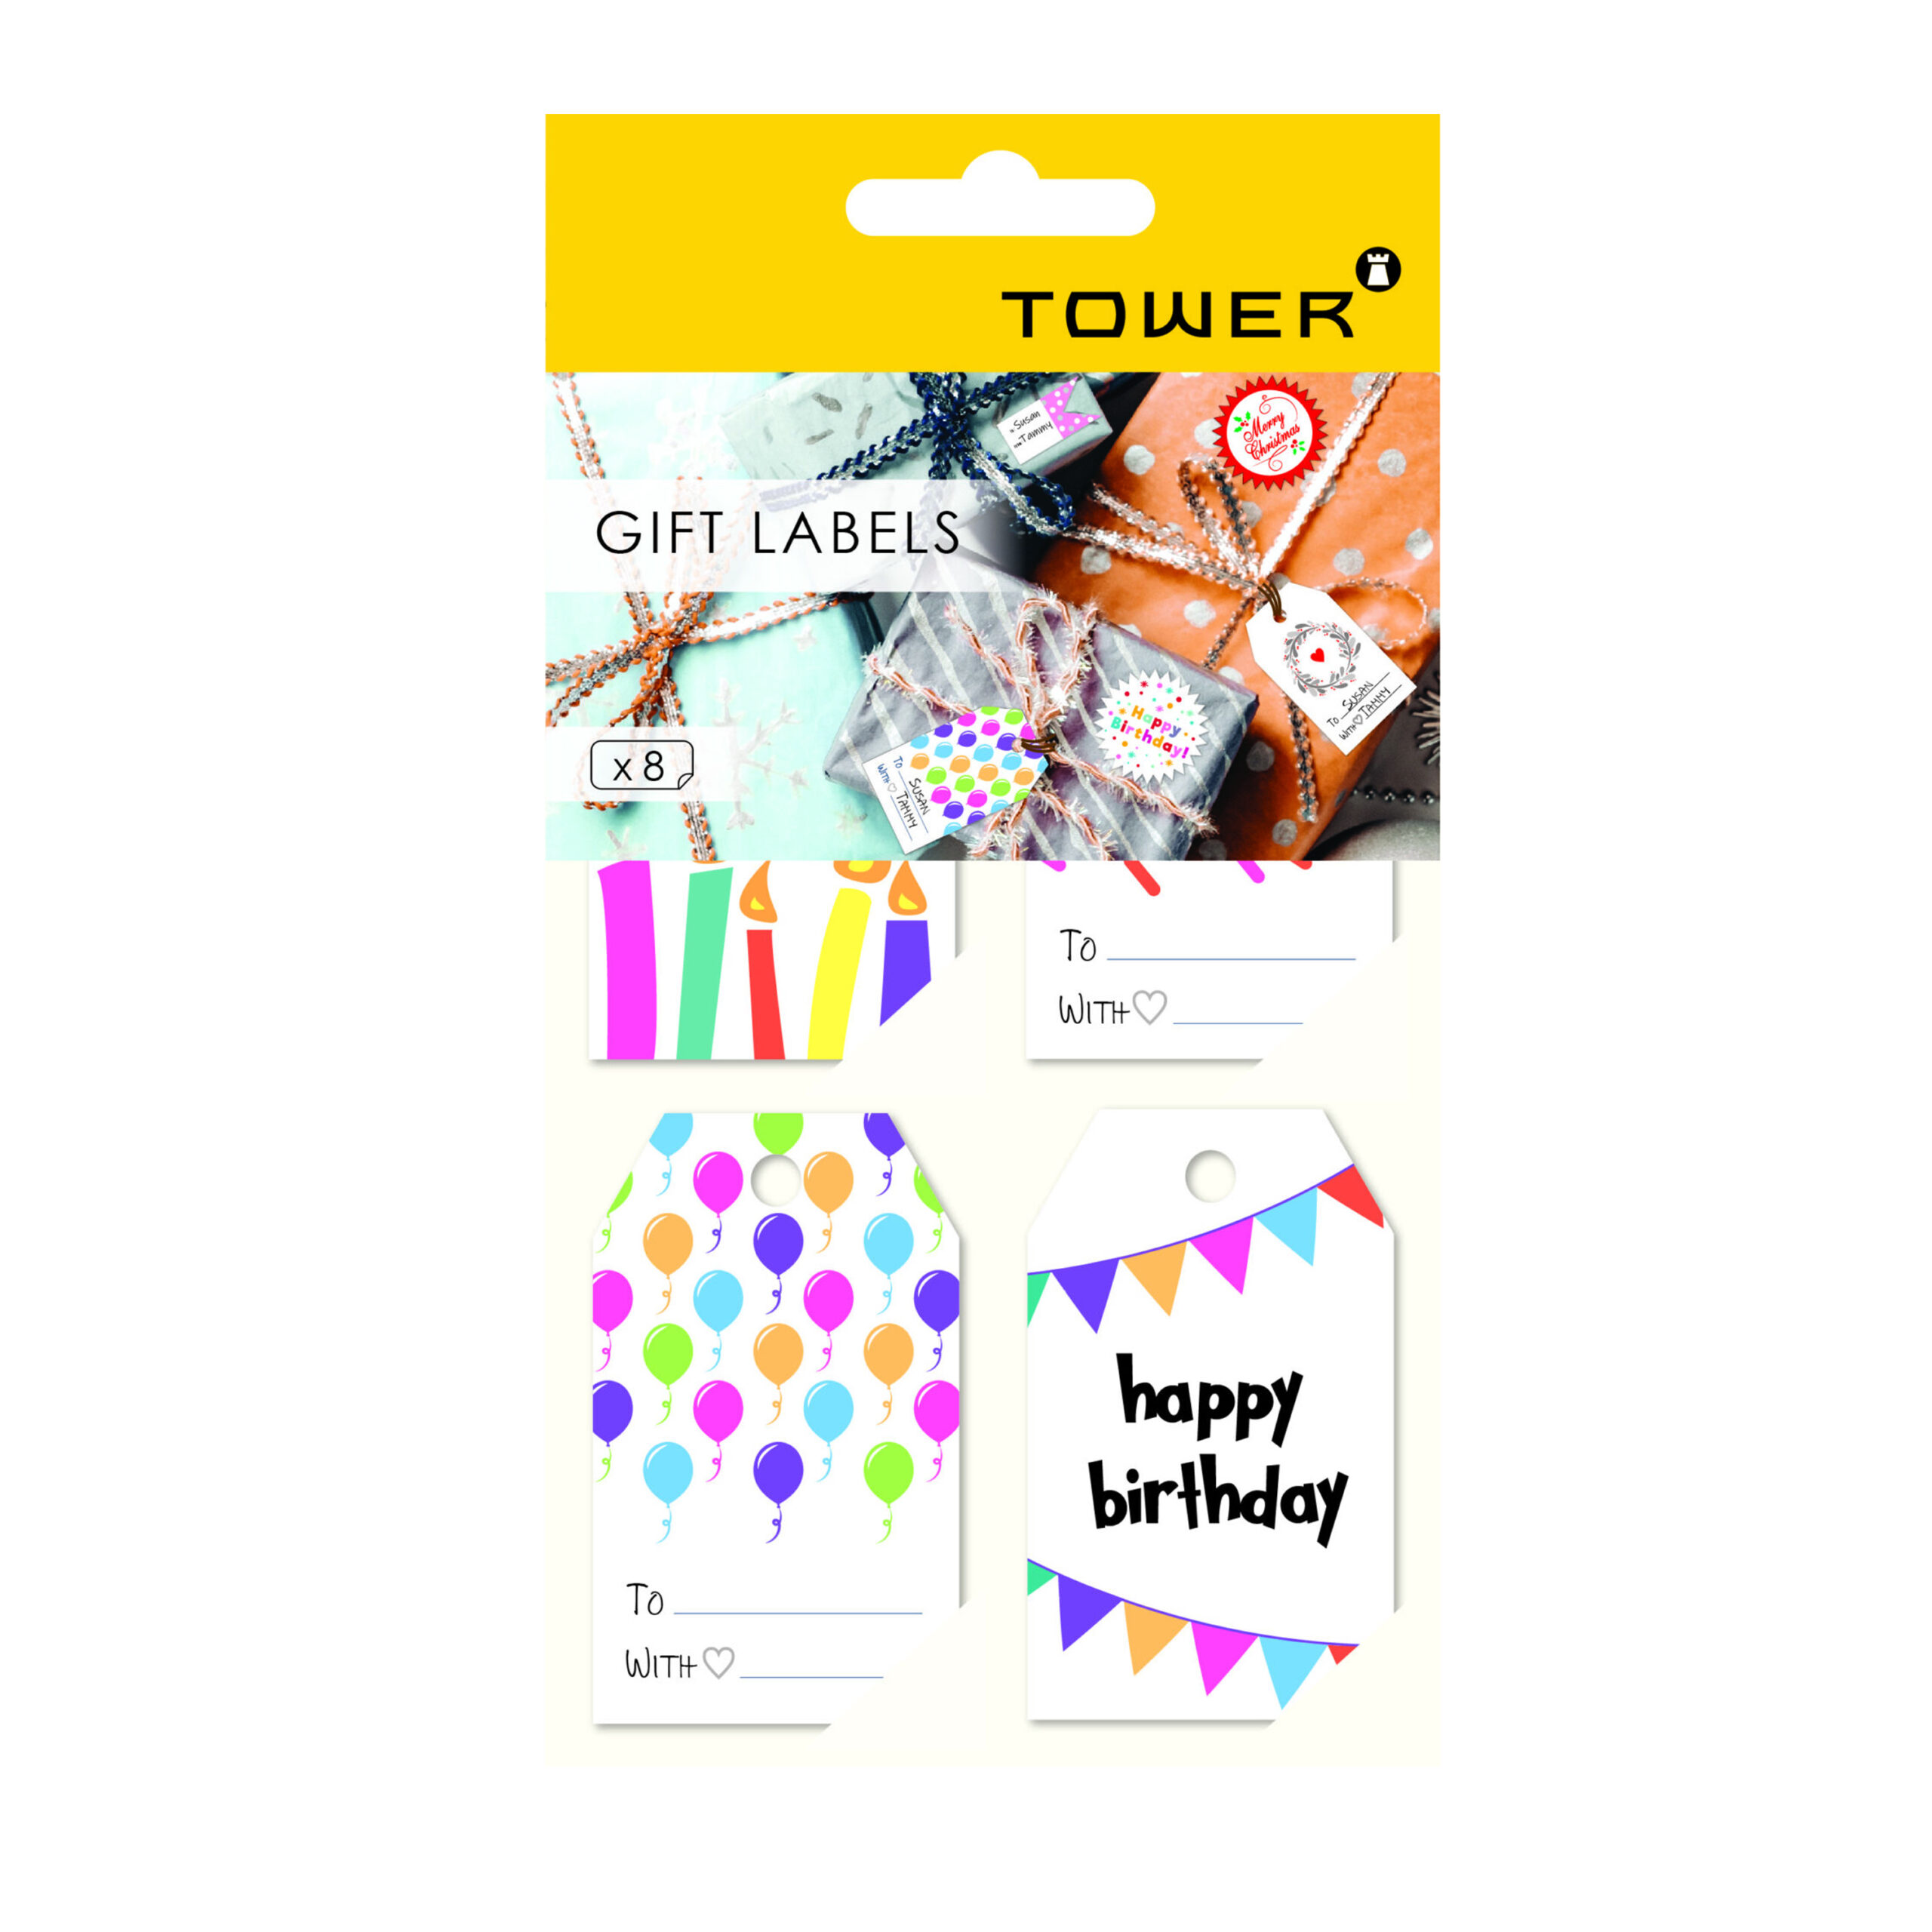 TOWER GIFT
LABEL HAPPY
BIRTHDAY STRING
TAG (1x8)